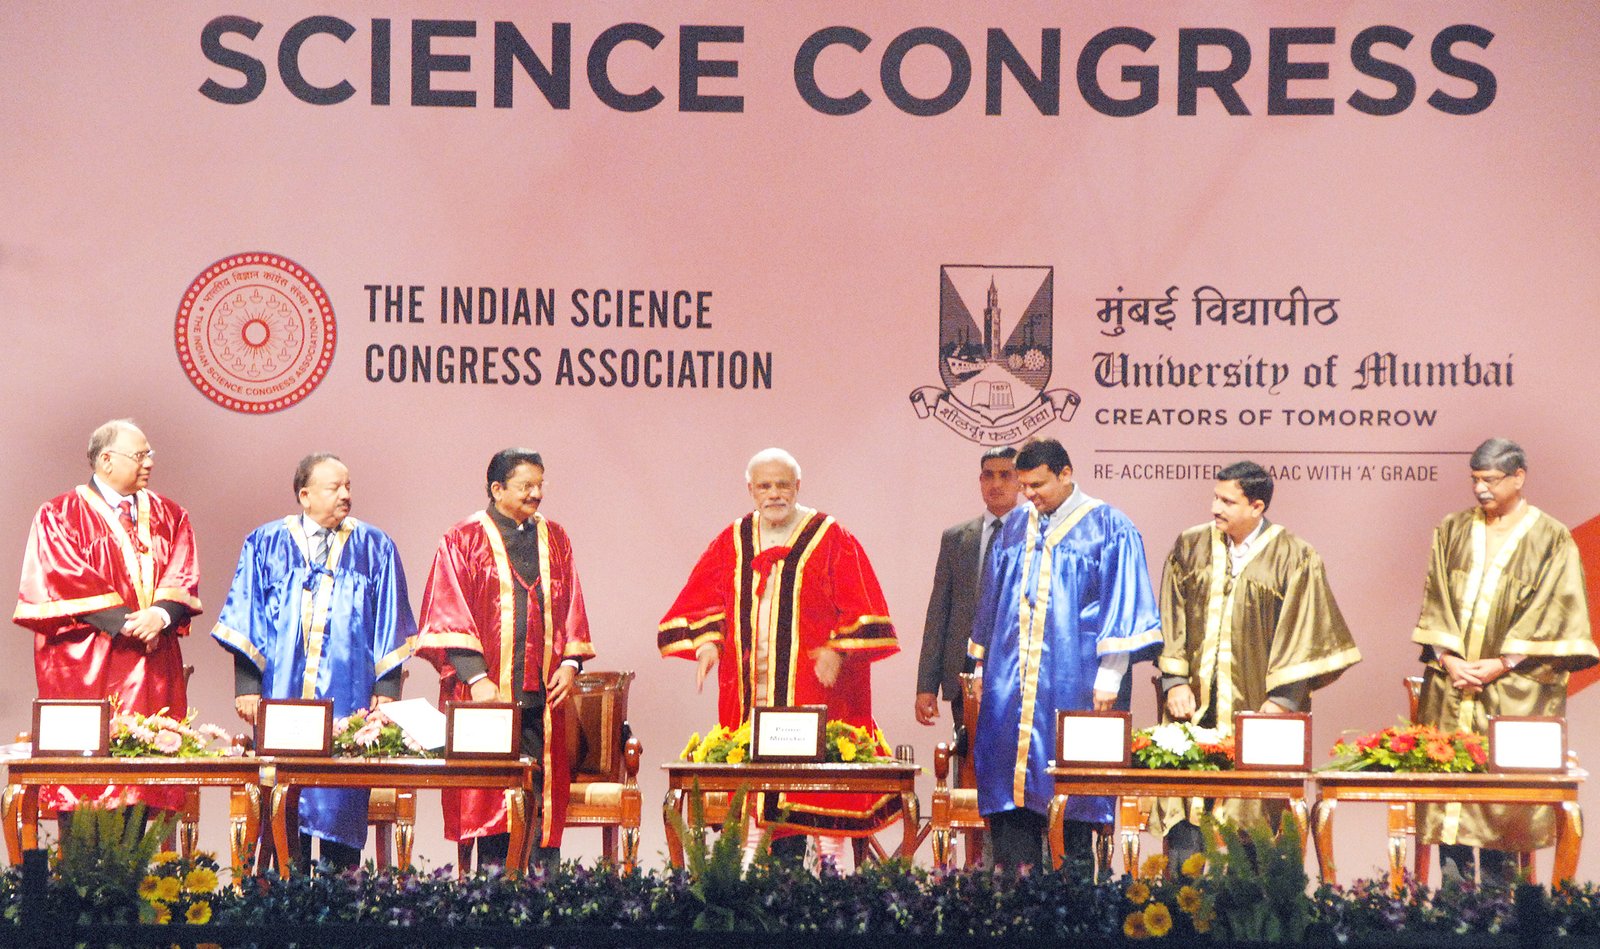 Prime Minister, Narendra Modi praised the achievements of pharma and agriculture sectors.